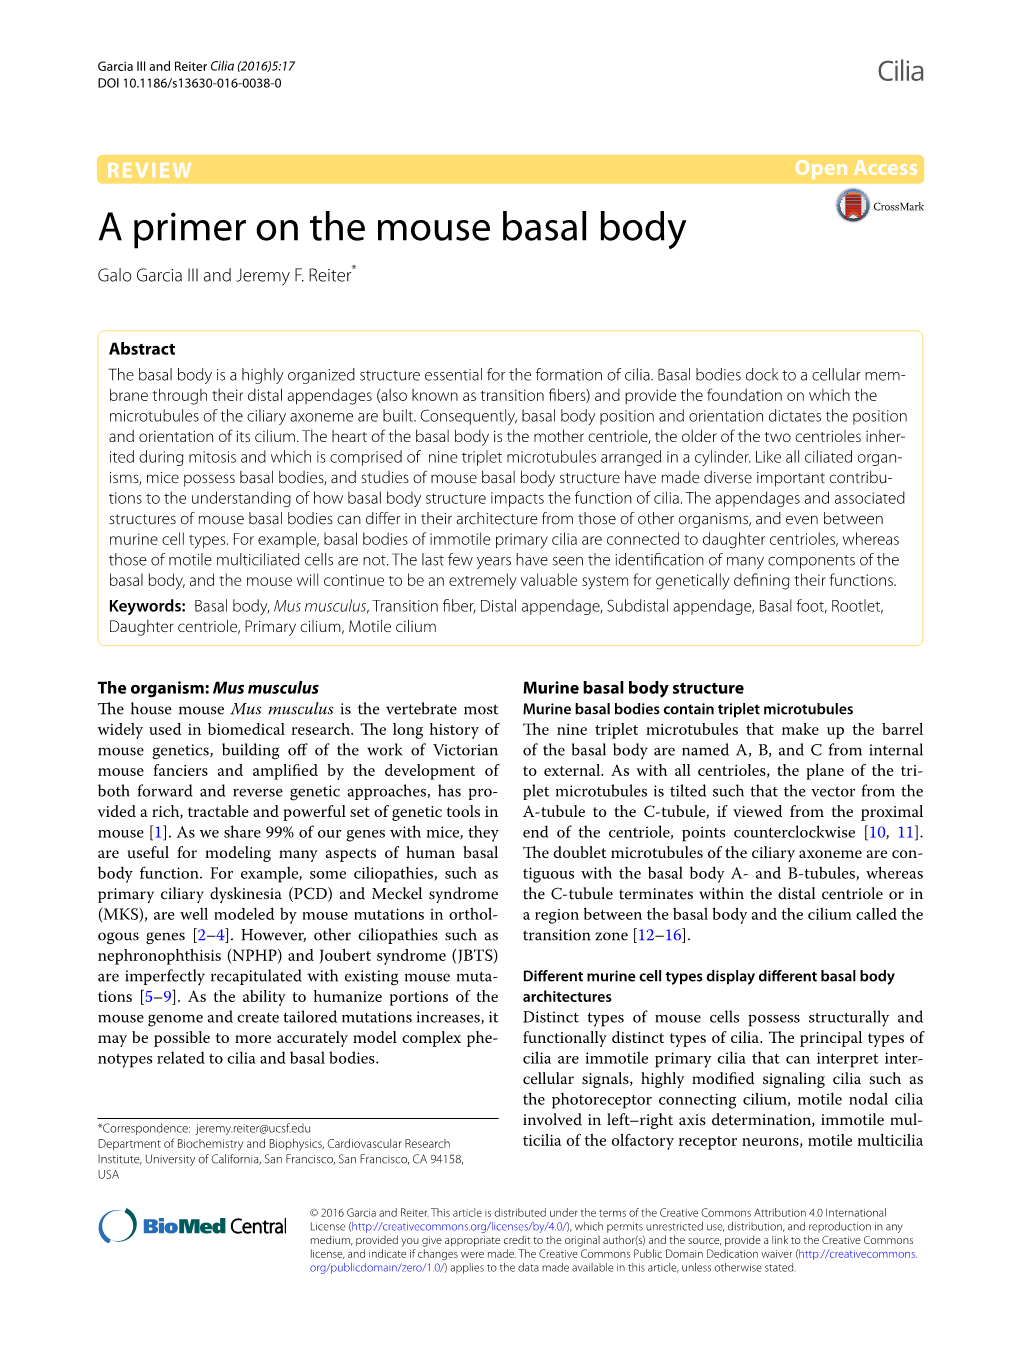 A Primer on the Mouse Basal Body Galo Garcia III and Jeremy F